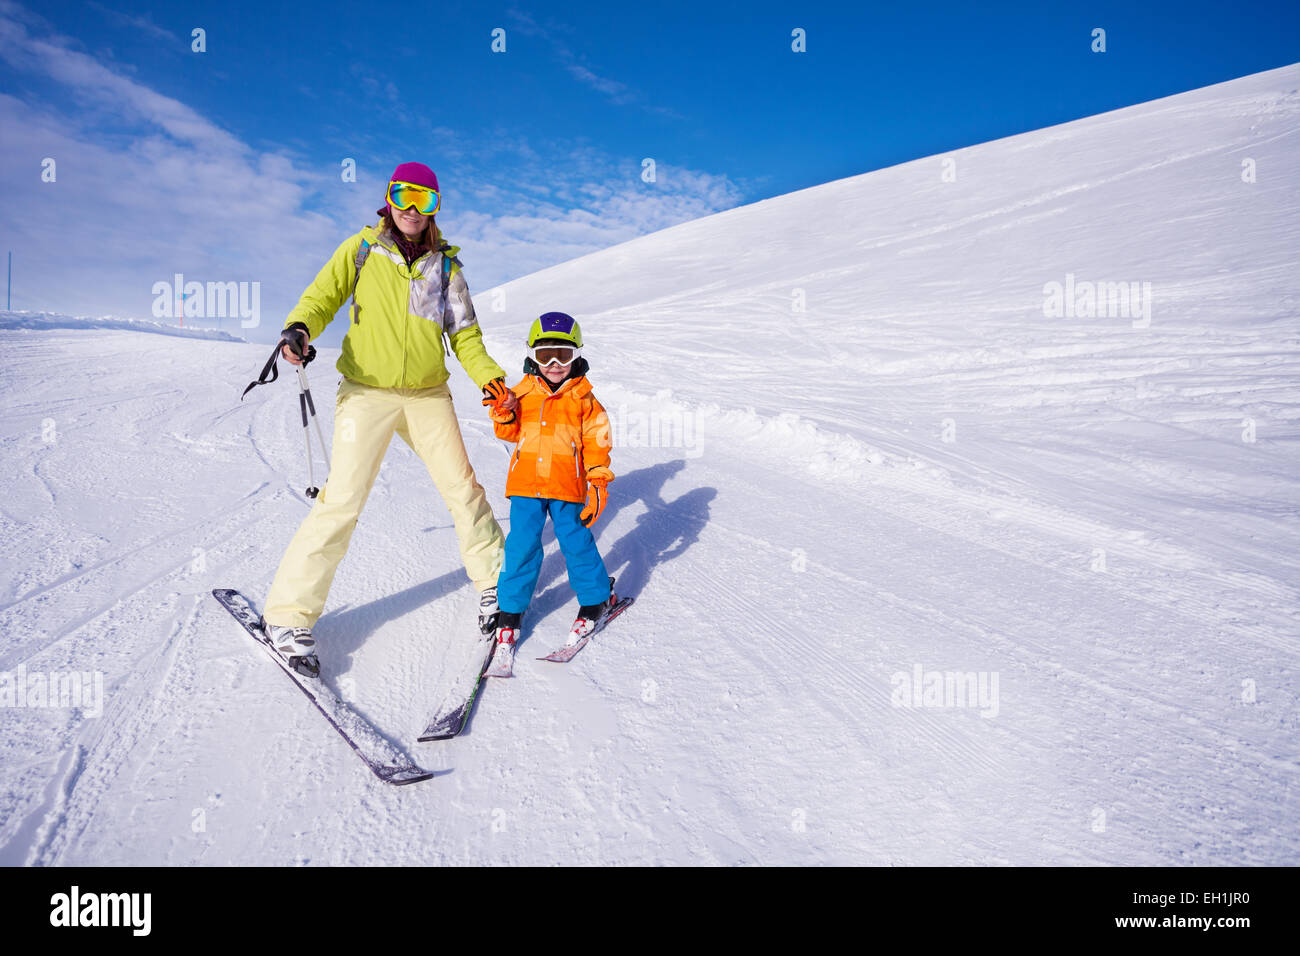 Mother and little boy learning to ski holding hand Stock Photo